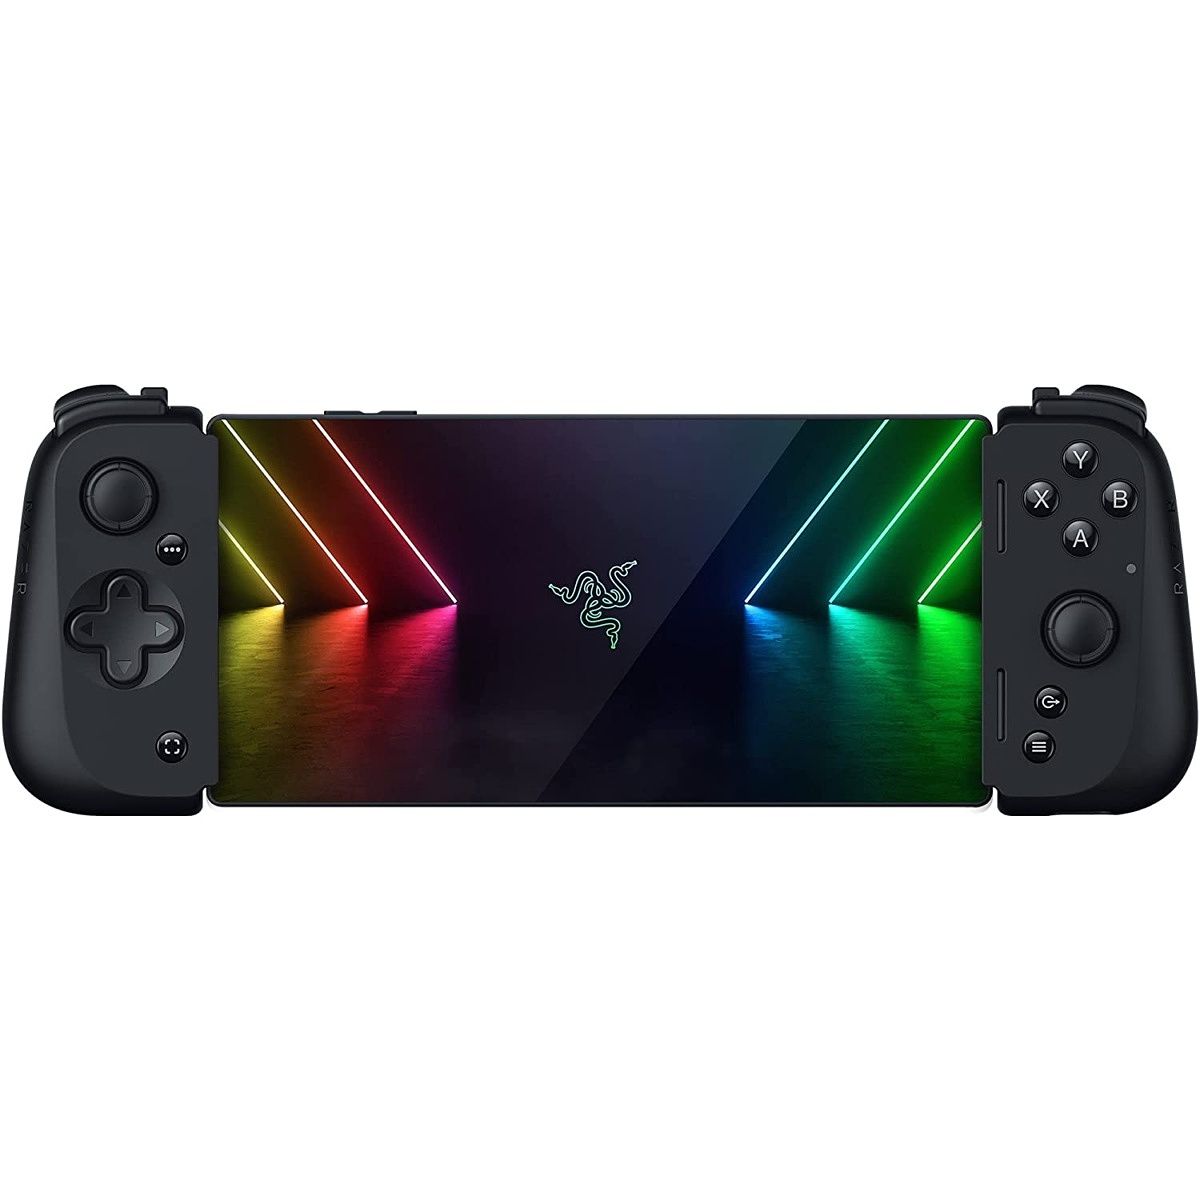 The Razer Kishi v2 is the follow-up to the company's already-great universal controller. There are a few improvements across the board, and it makes for an excellent cloud gaming or emulation controller.